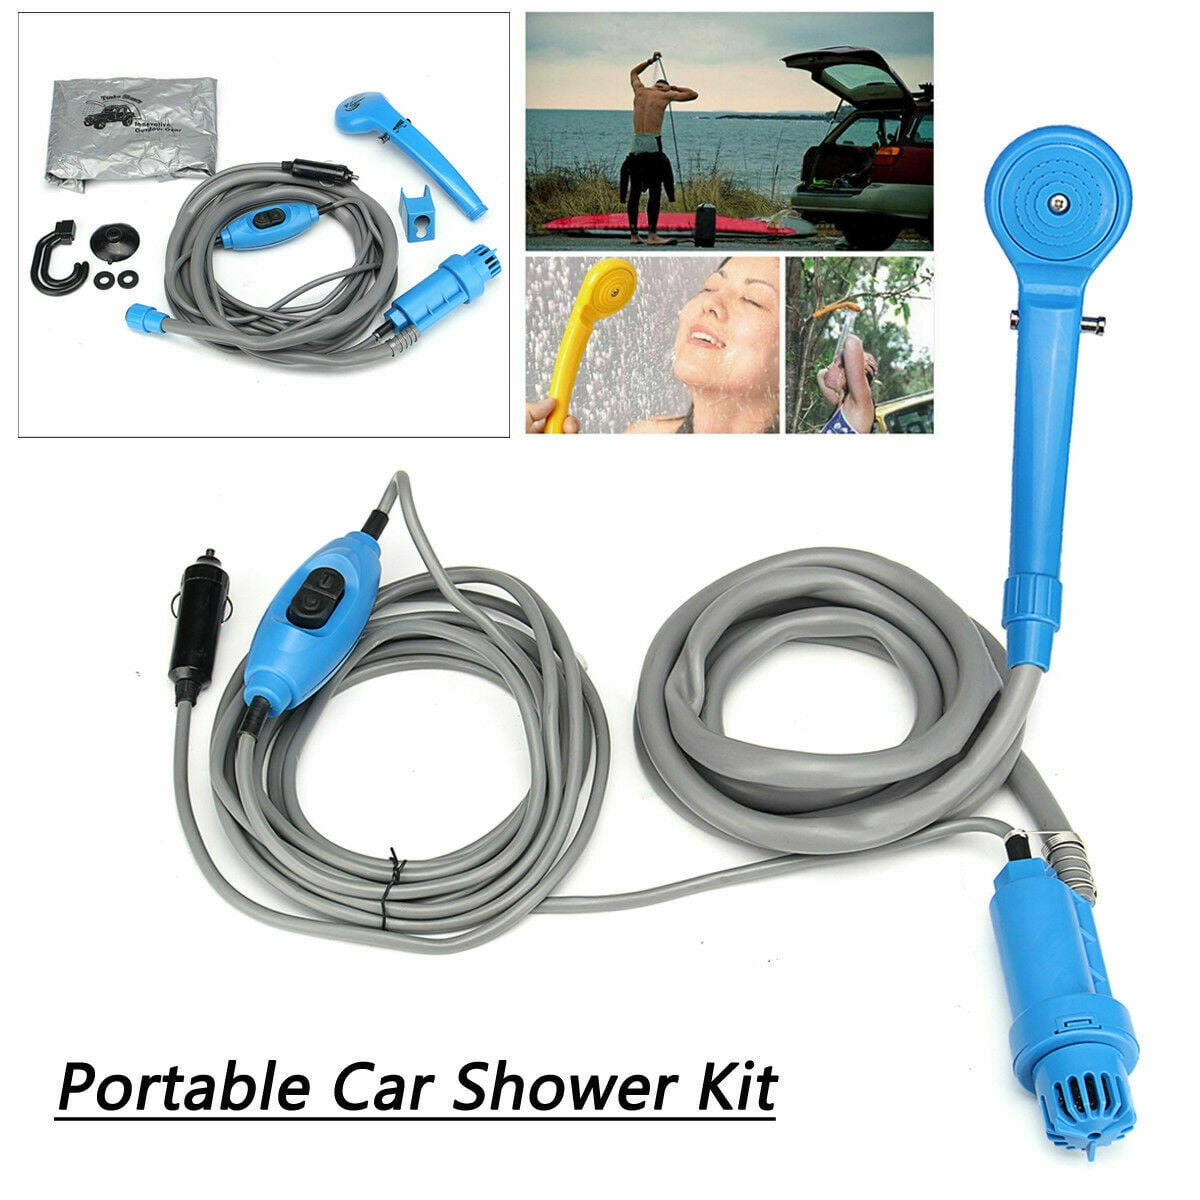 NEW 12V Camping Car Shower Spray Pump Kit Portable Vehicle Outdoor Travel Hiking 